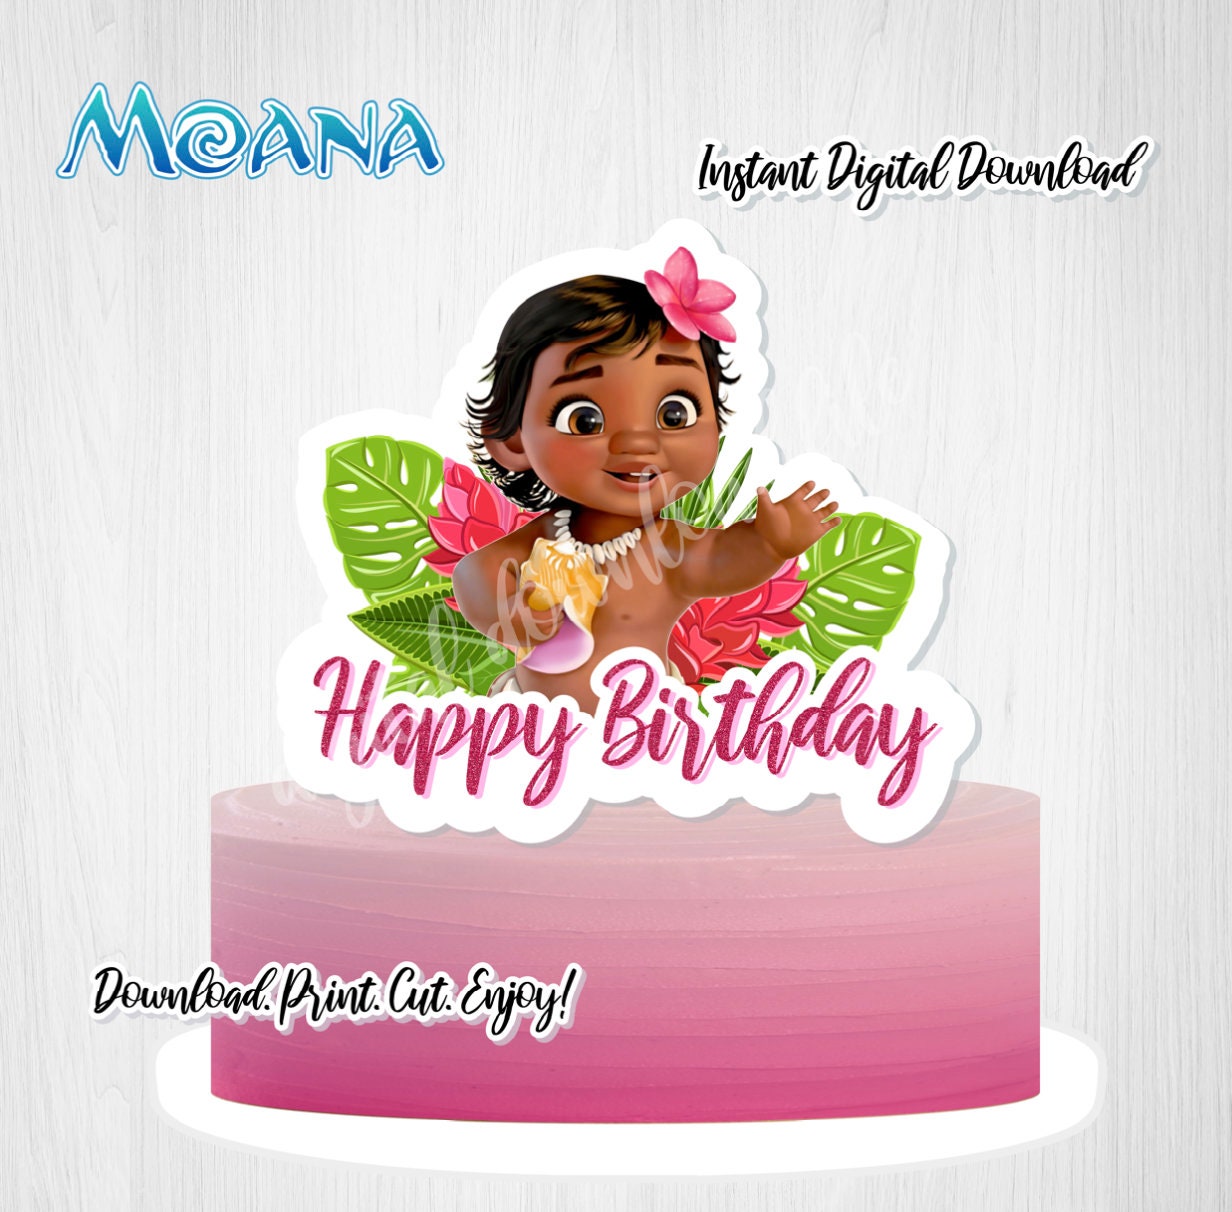 Personalised Moana Cake Topper, Birthday Decorations, 3D Personalised | eBay